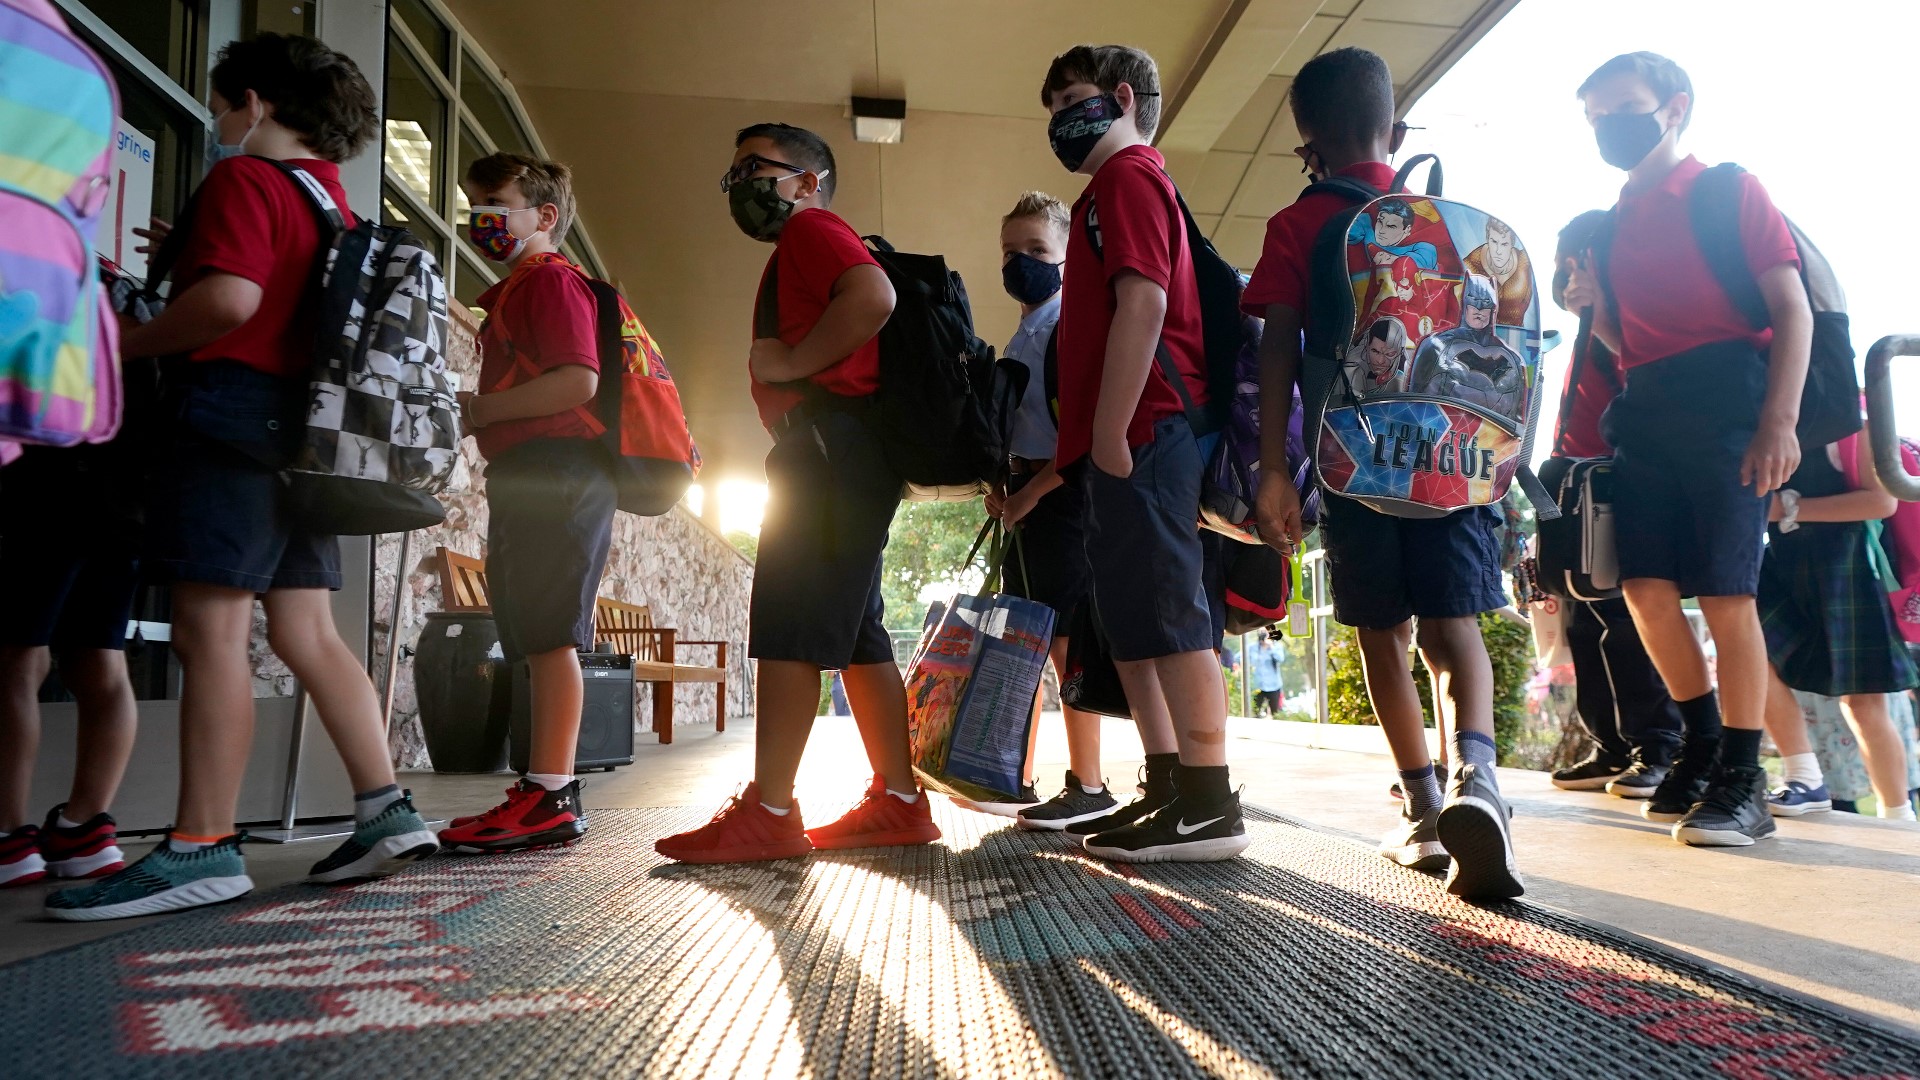 The school's board of education voted to drop the mandate and masks will be optional once classes resume on Jan. 4.